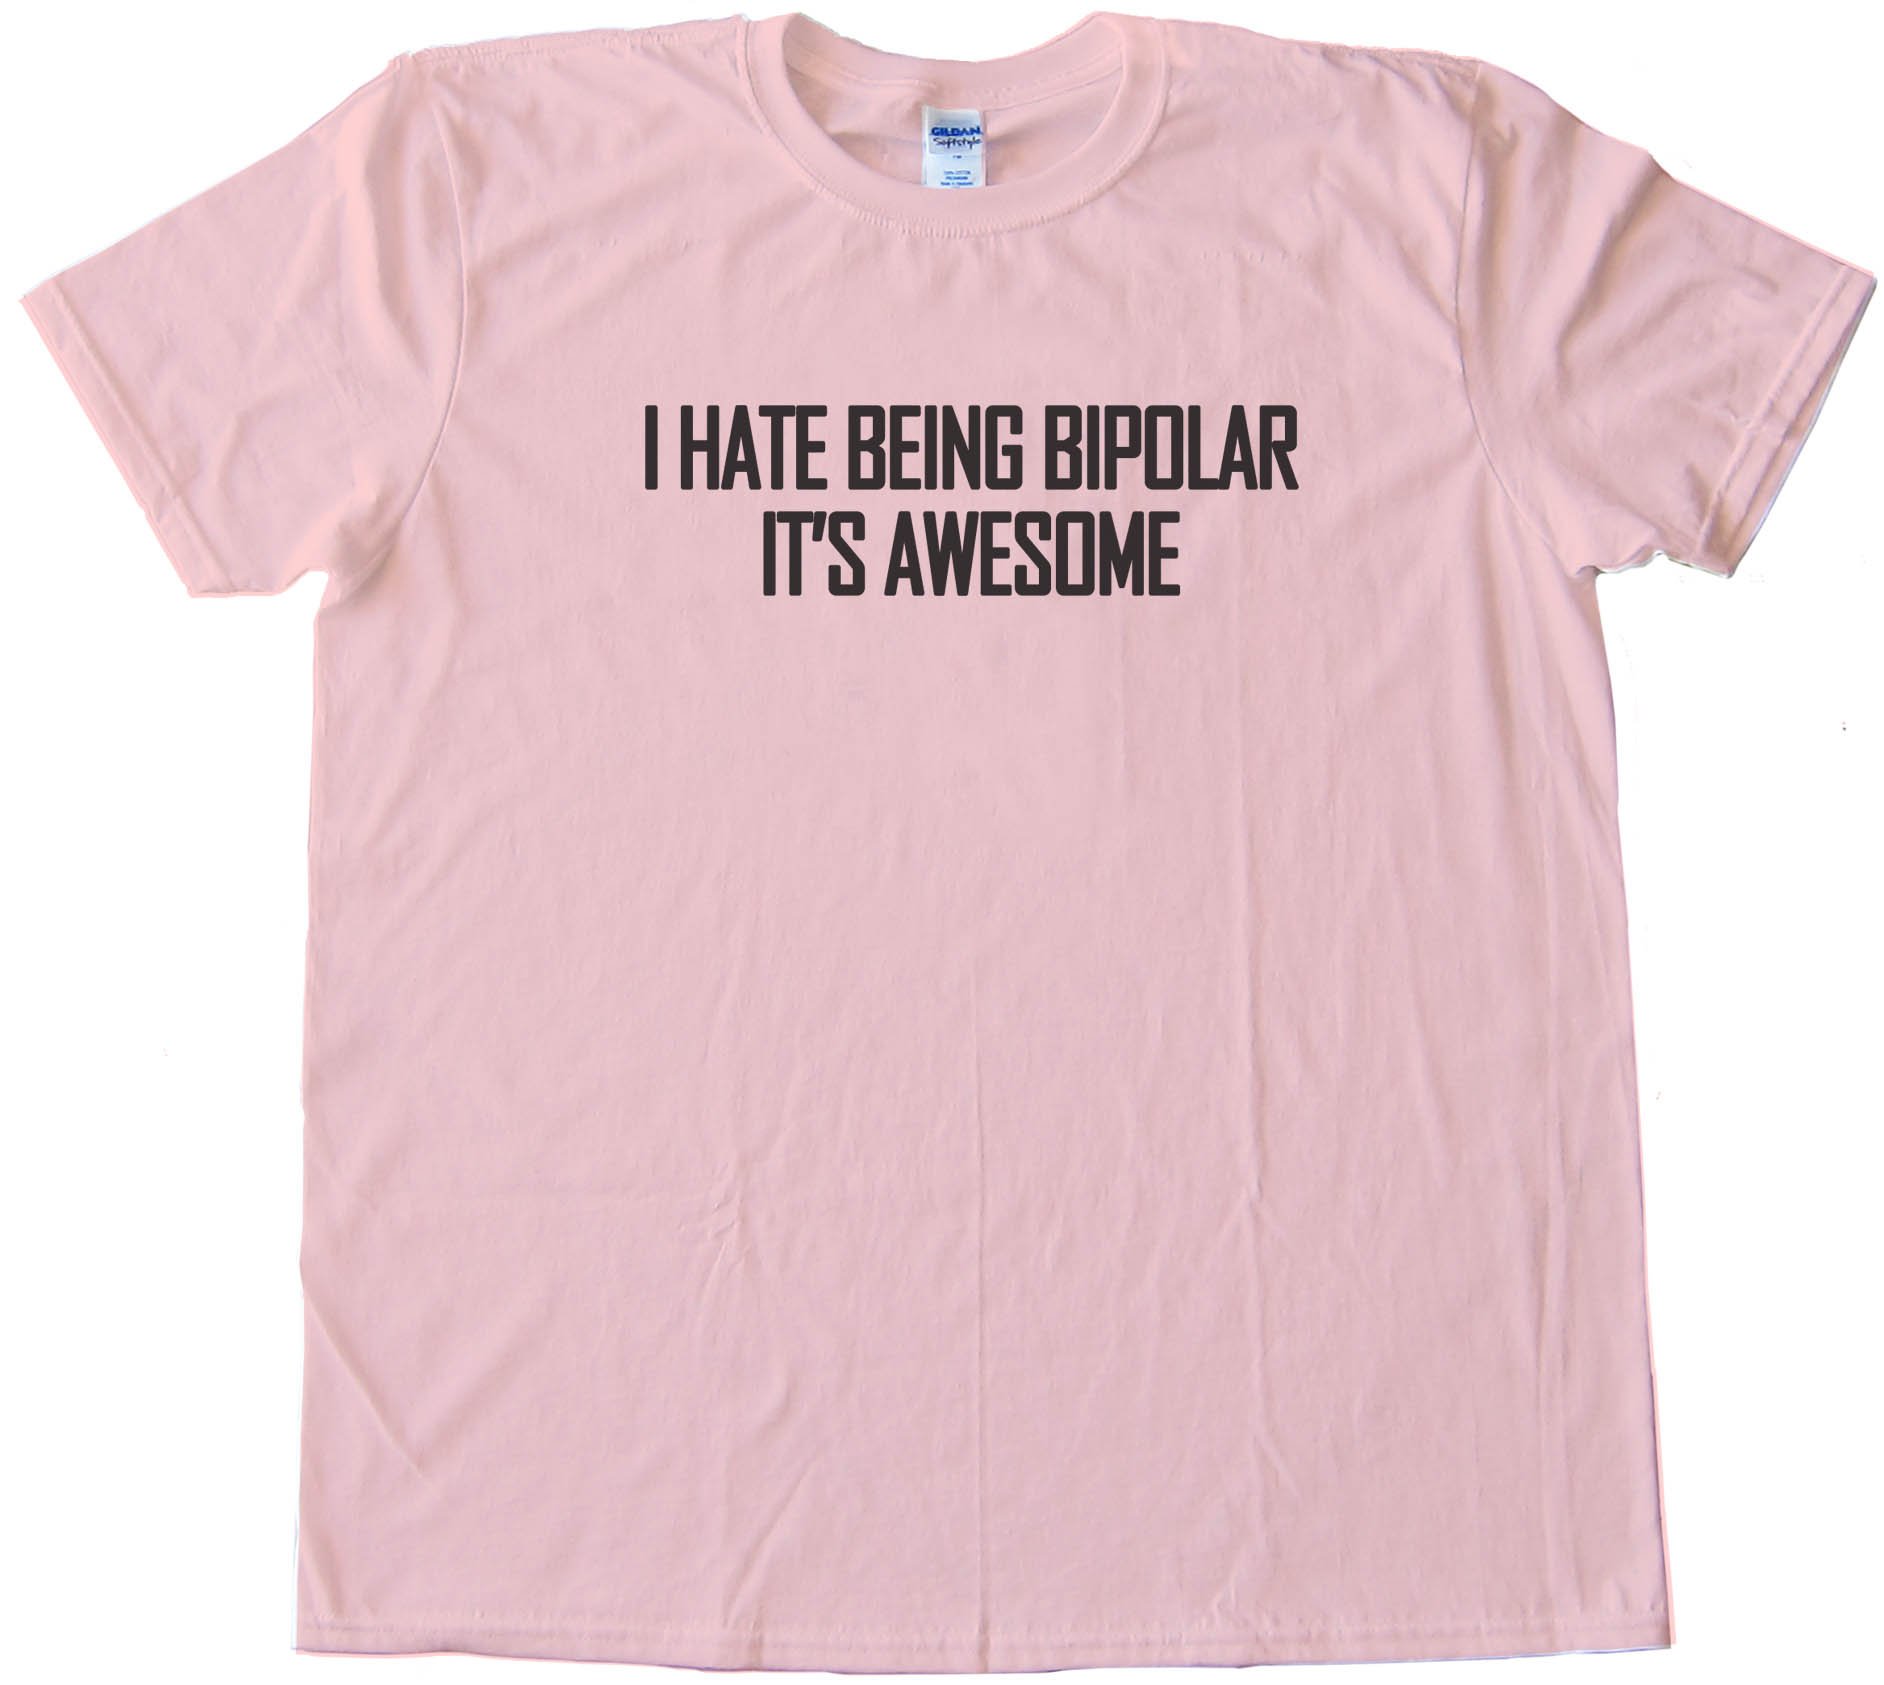 I Hate Being Bipolar - It'S Awesome - Tee Shirt